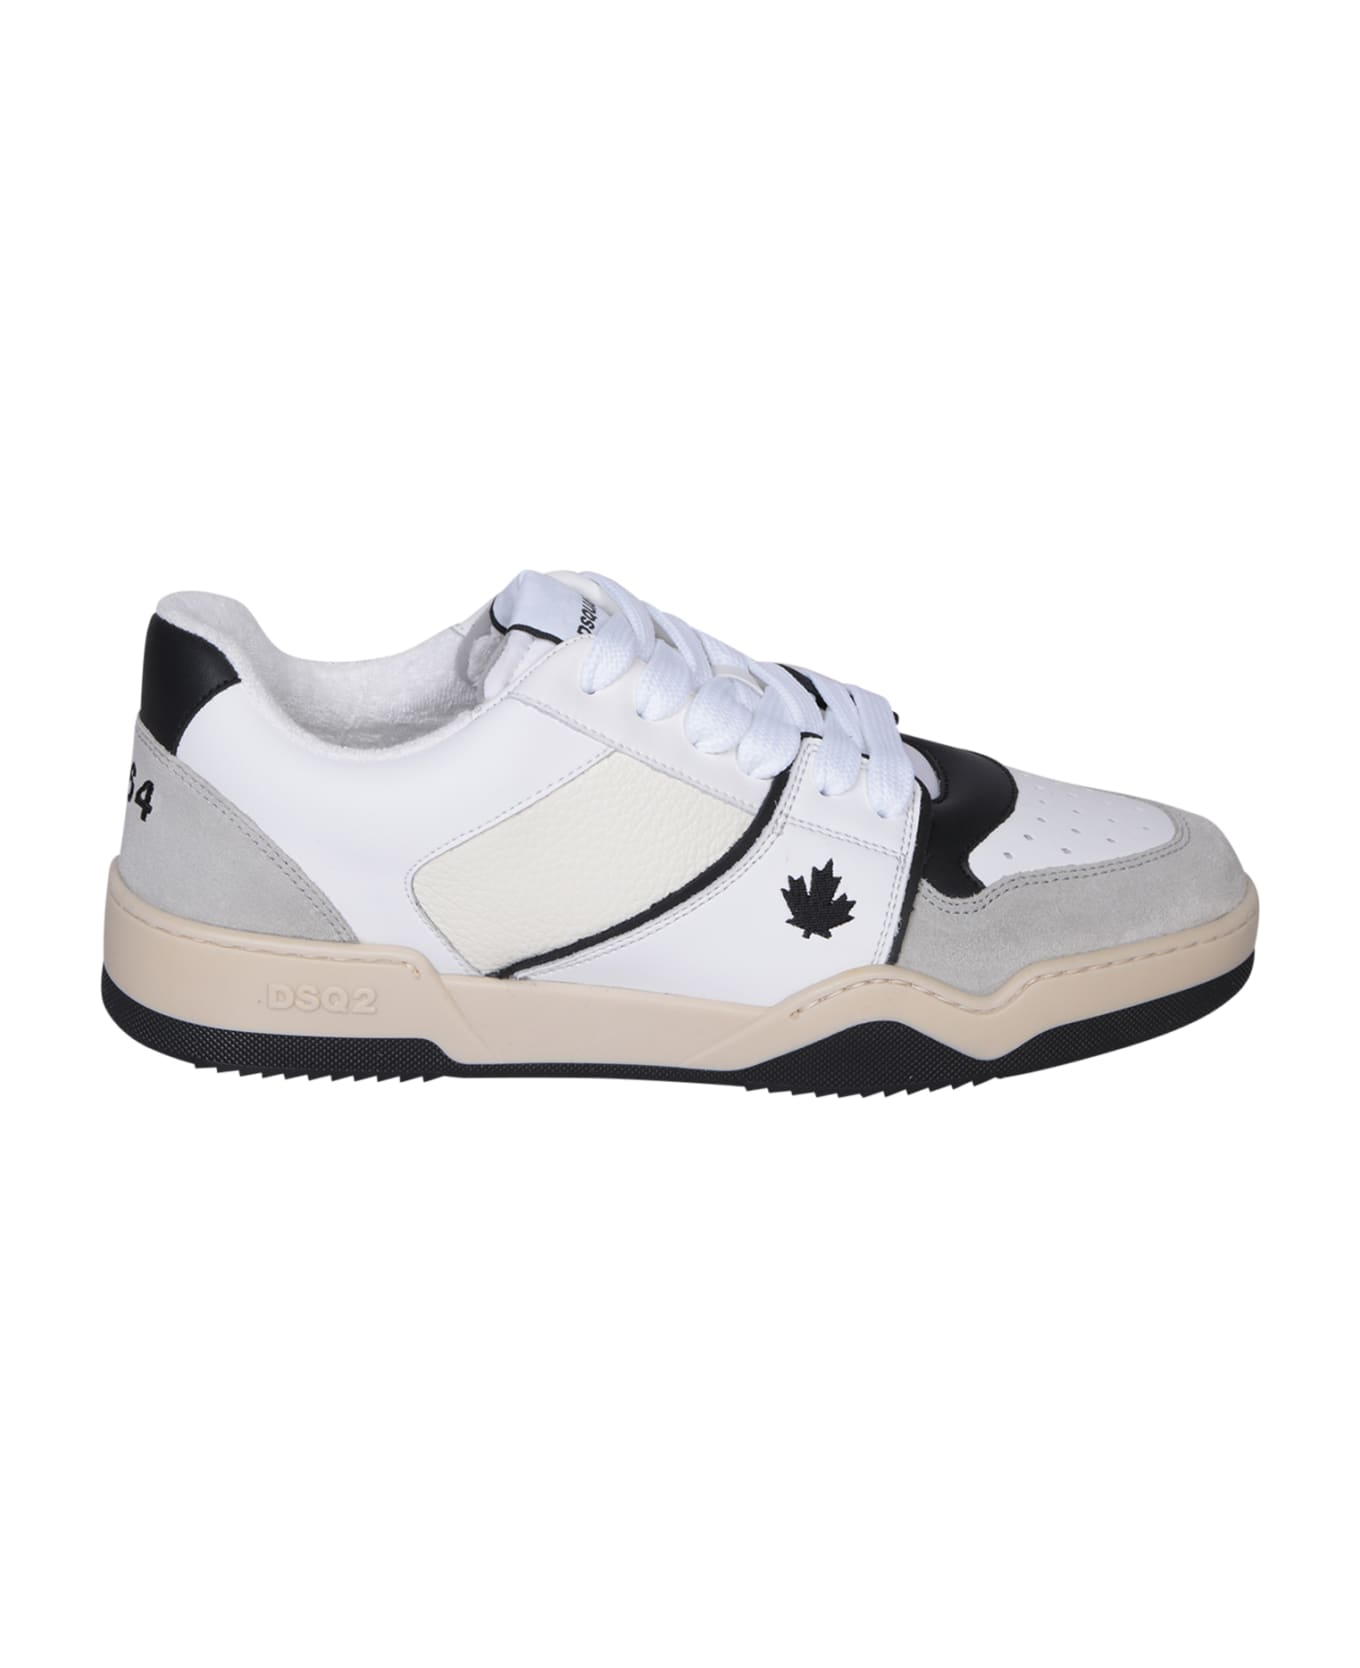 Dsquared2 Spiker White Sneakers - White